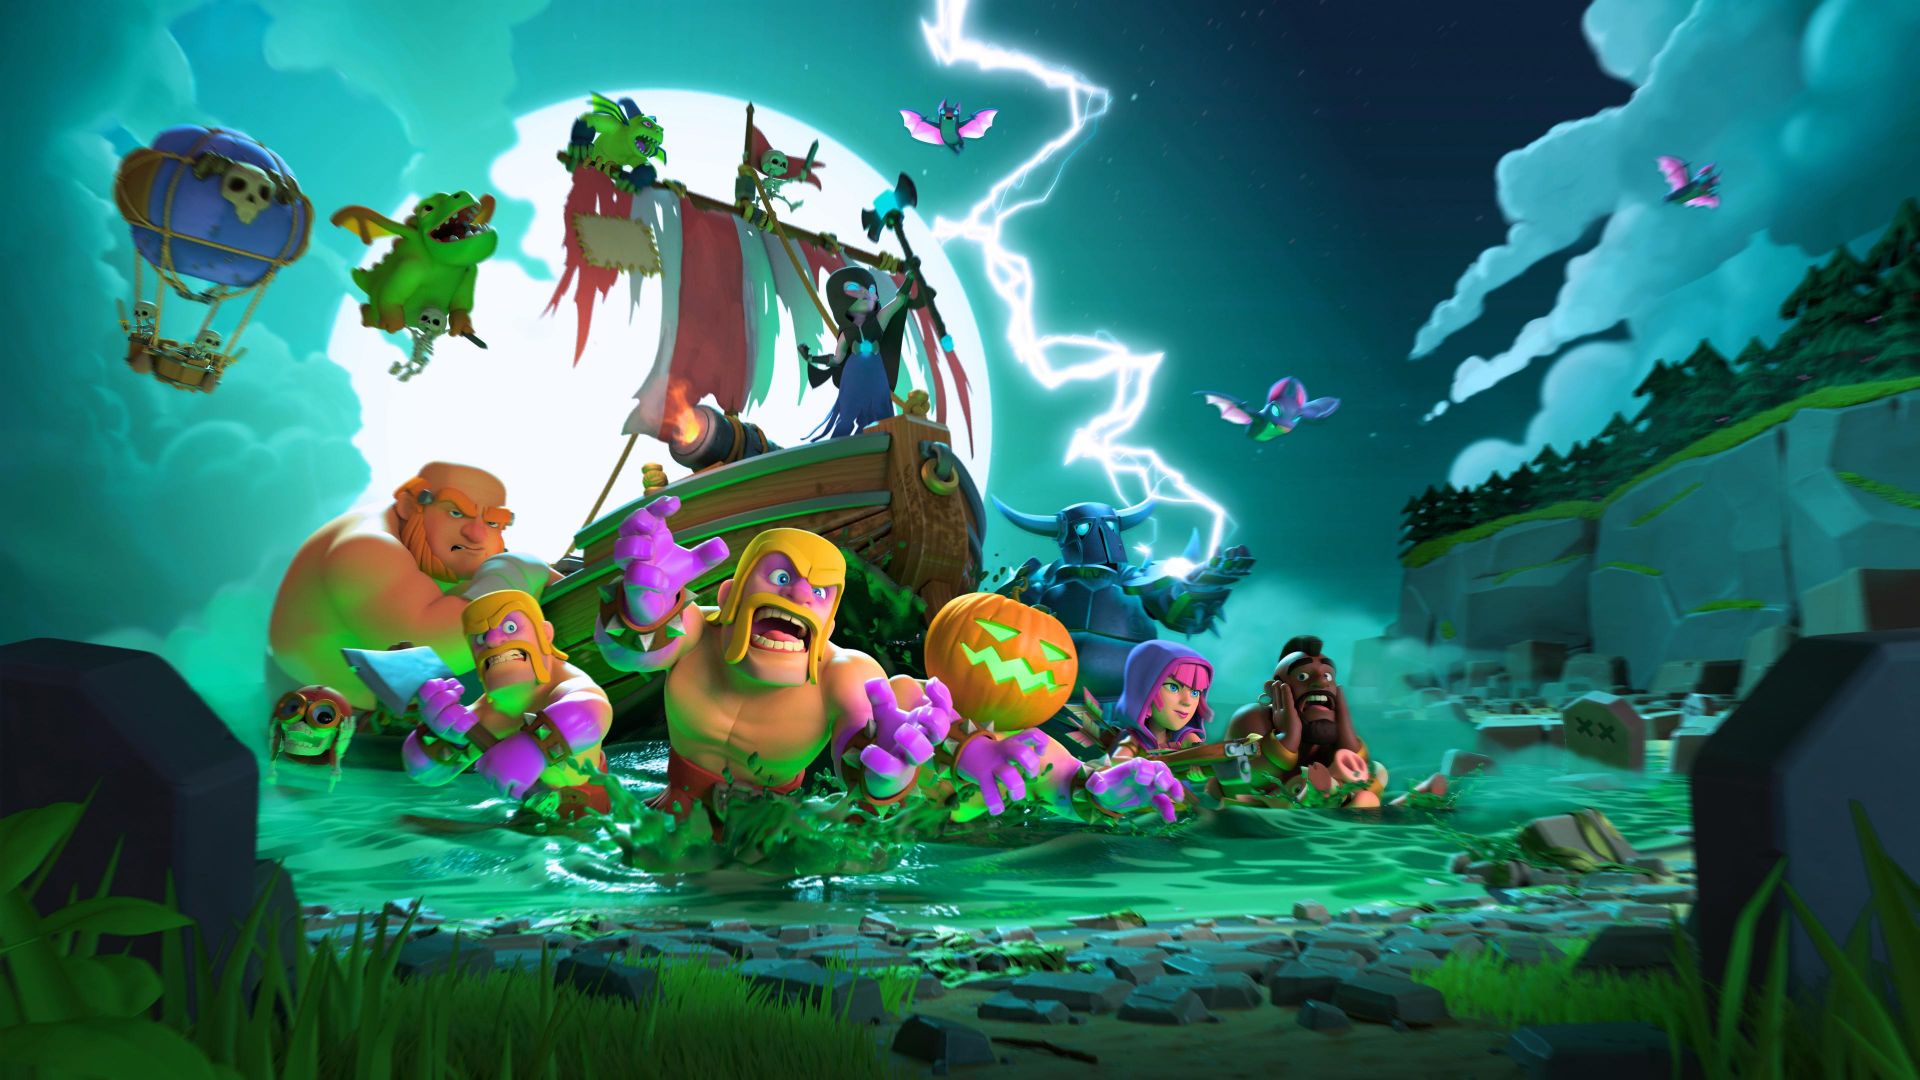 Wallpaper Clash of clans, mobile game, halloween, 4k